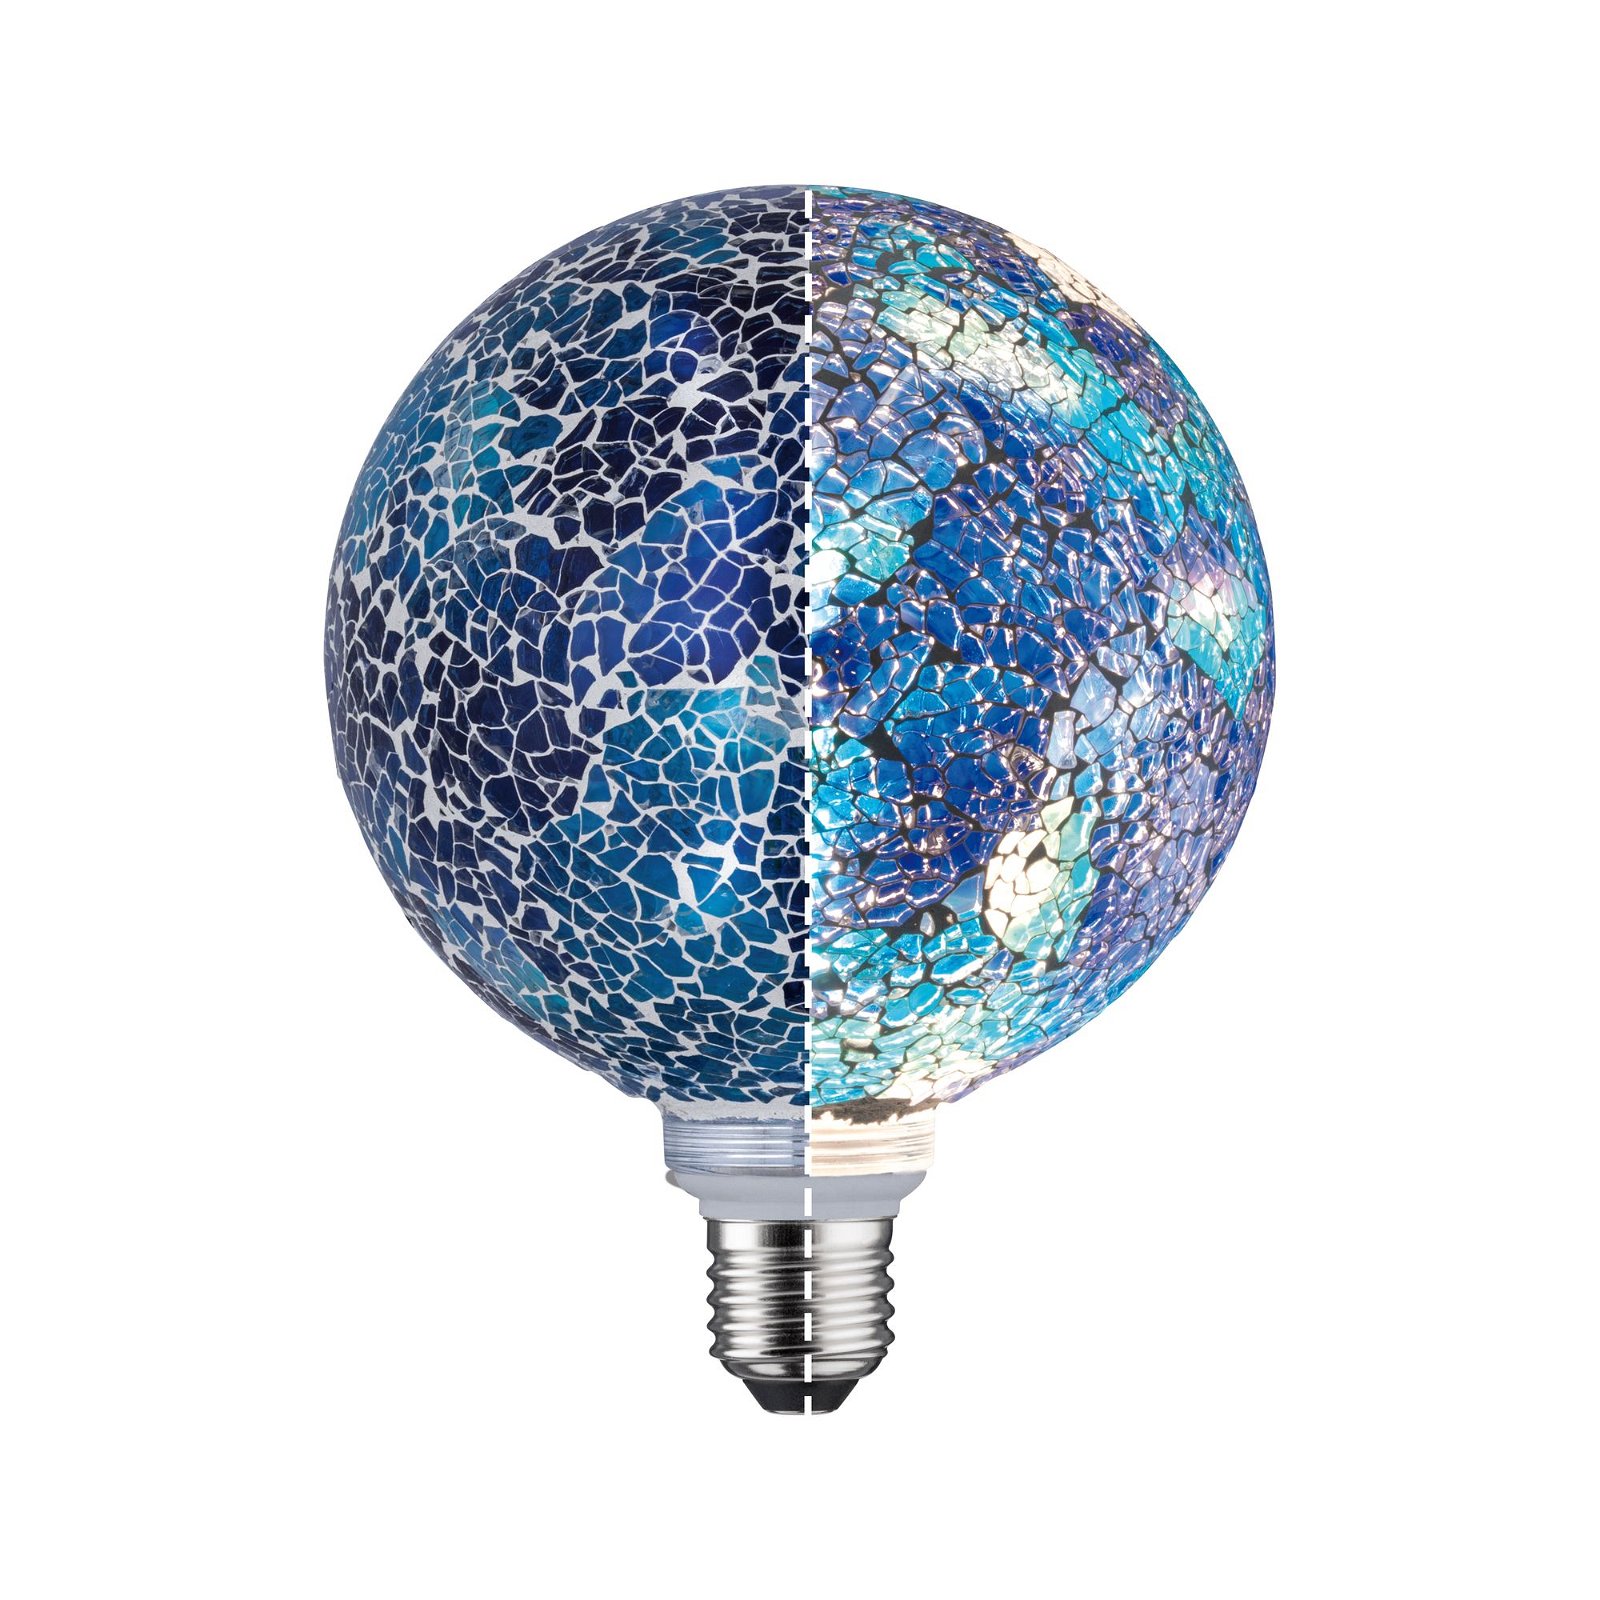 Miracle Mosaic Edition 230 V Standard LED Globe G125 E27 470lm 5W 2700K dimmable Blue